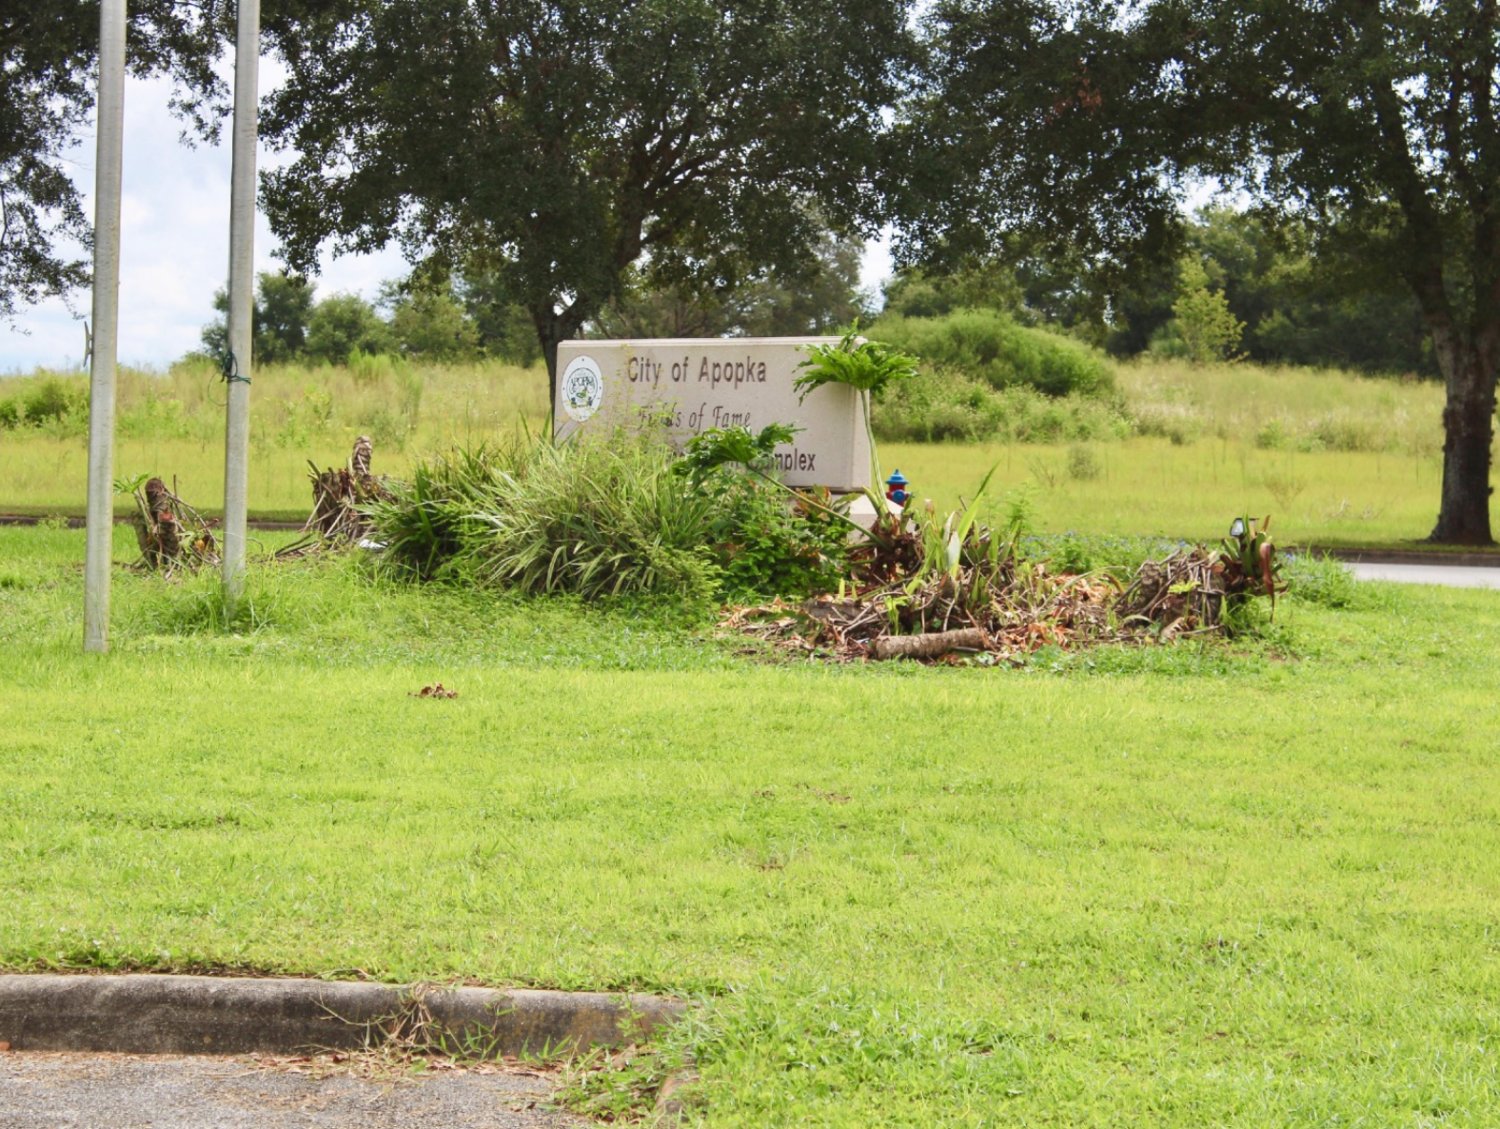 Photo of overgrown Apopka sign, used in presentation by Commissioner Kyle Becker